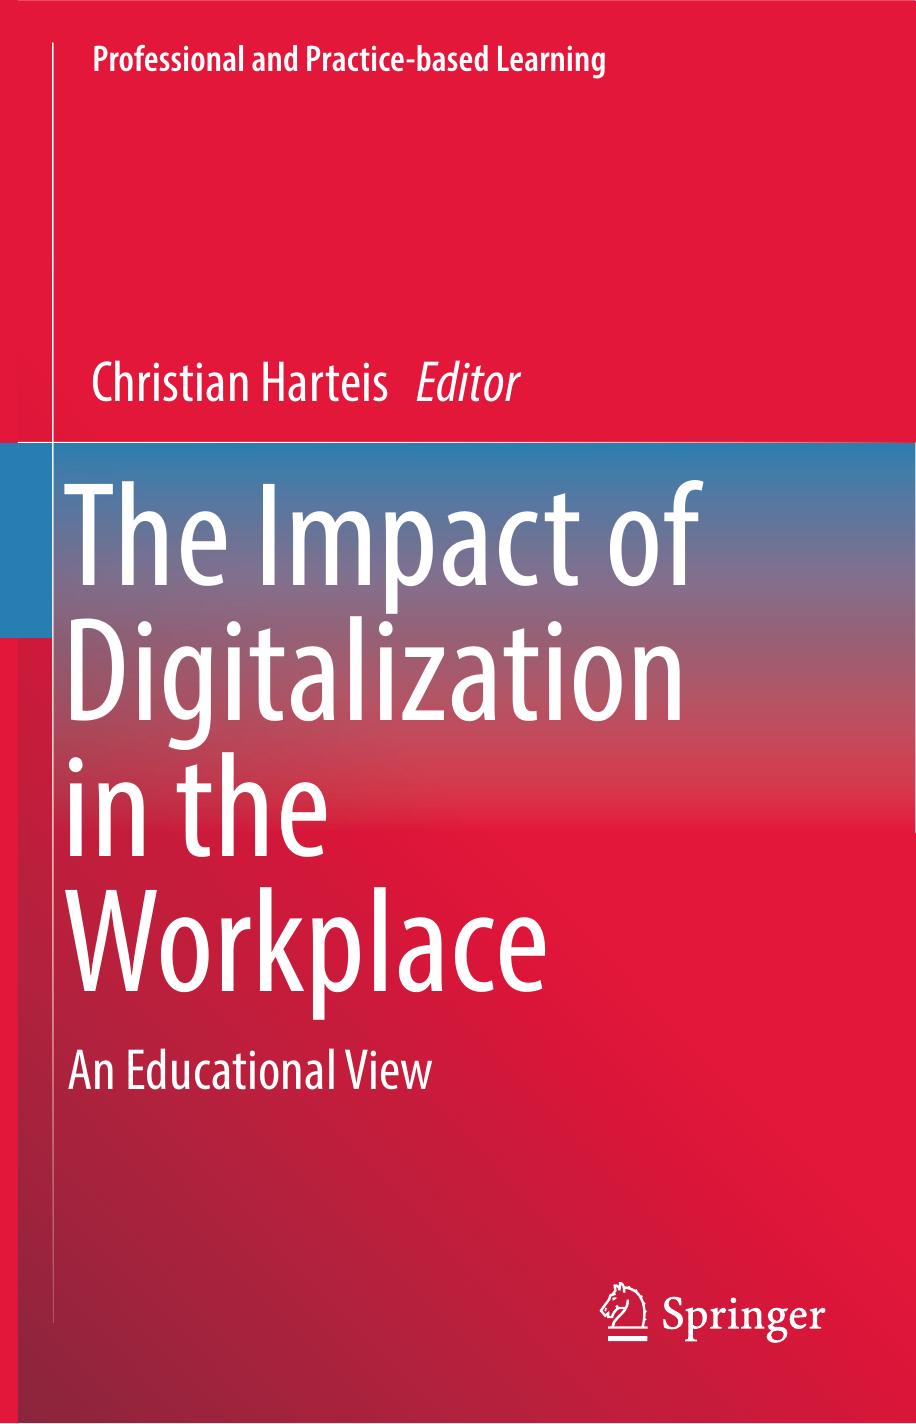 The Impact of Digitalization in the Workplace  An Educational View 2018.pdf